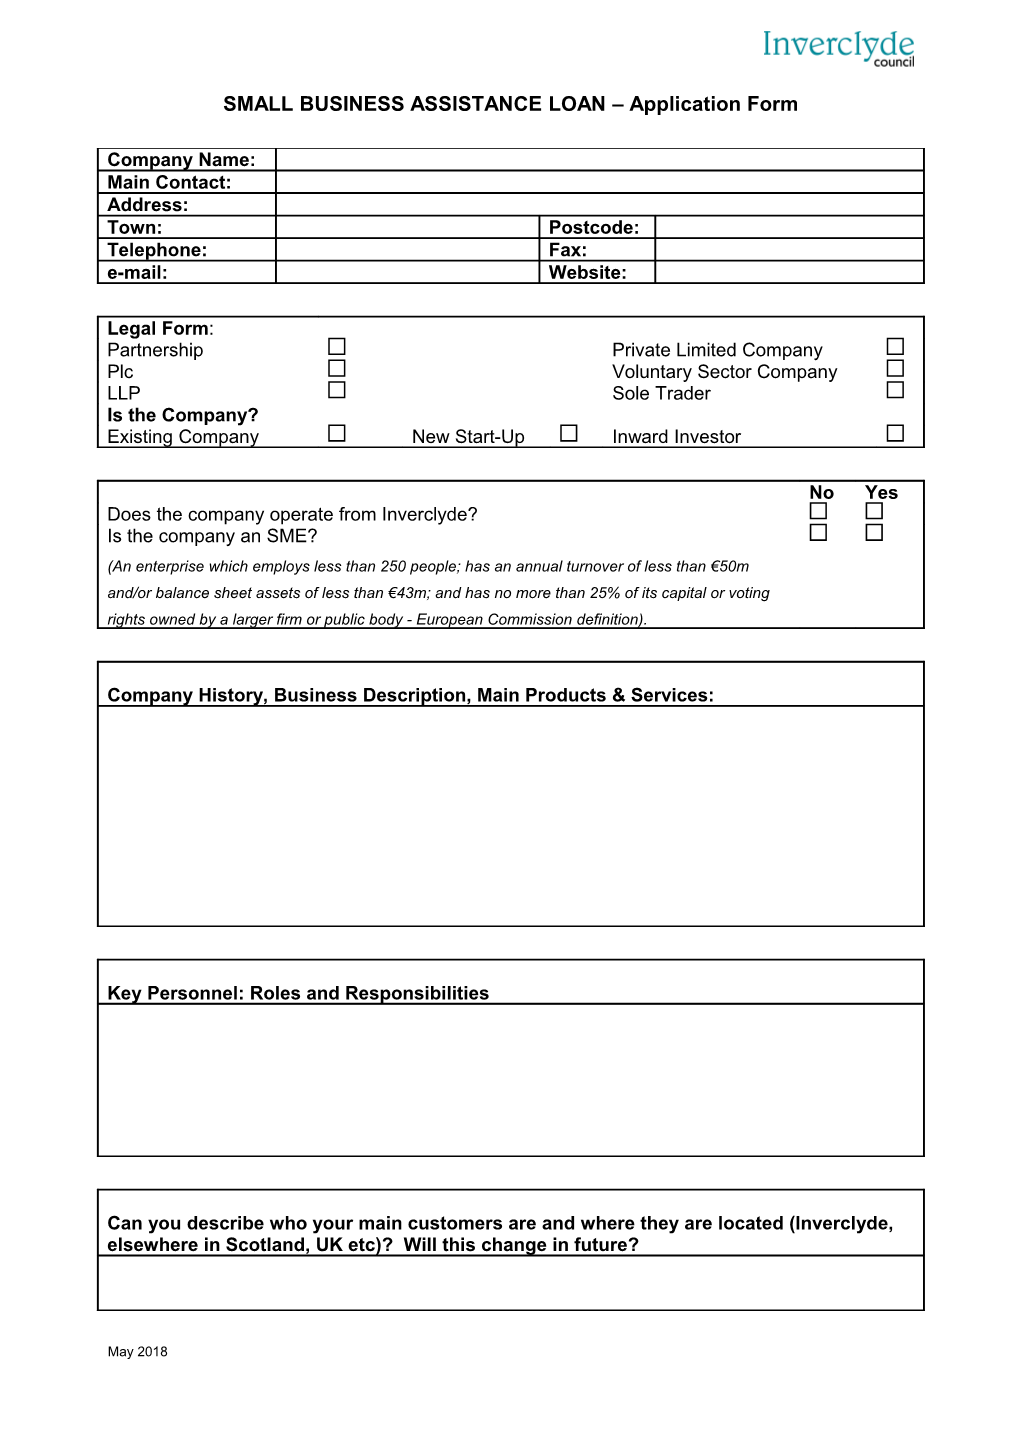 SMALL BUSINESS ASSISTANCE LOAN Application Form